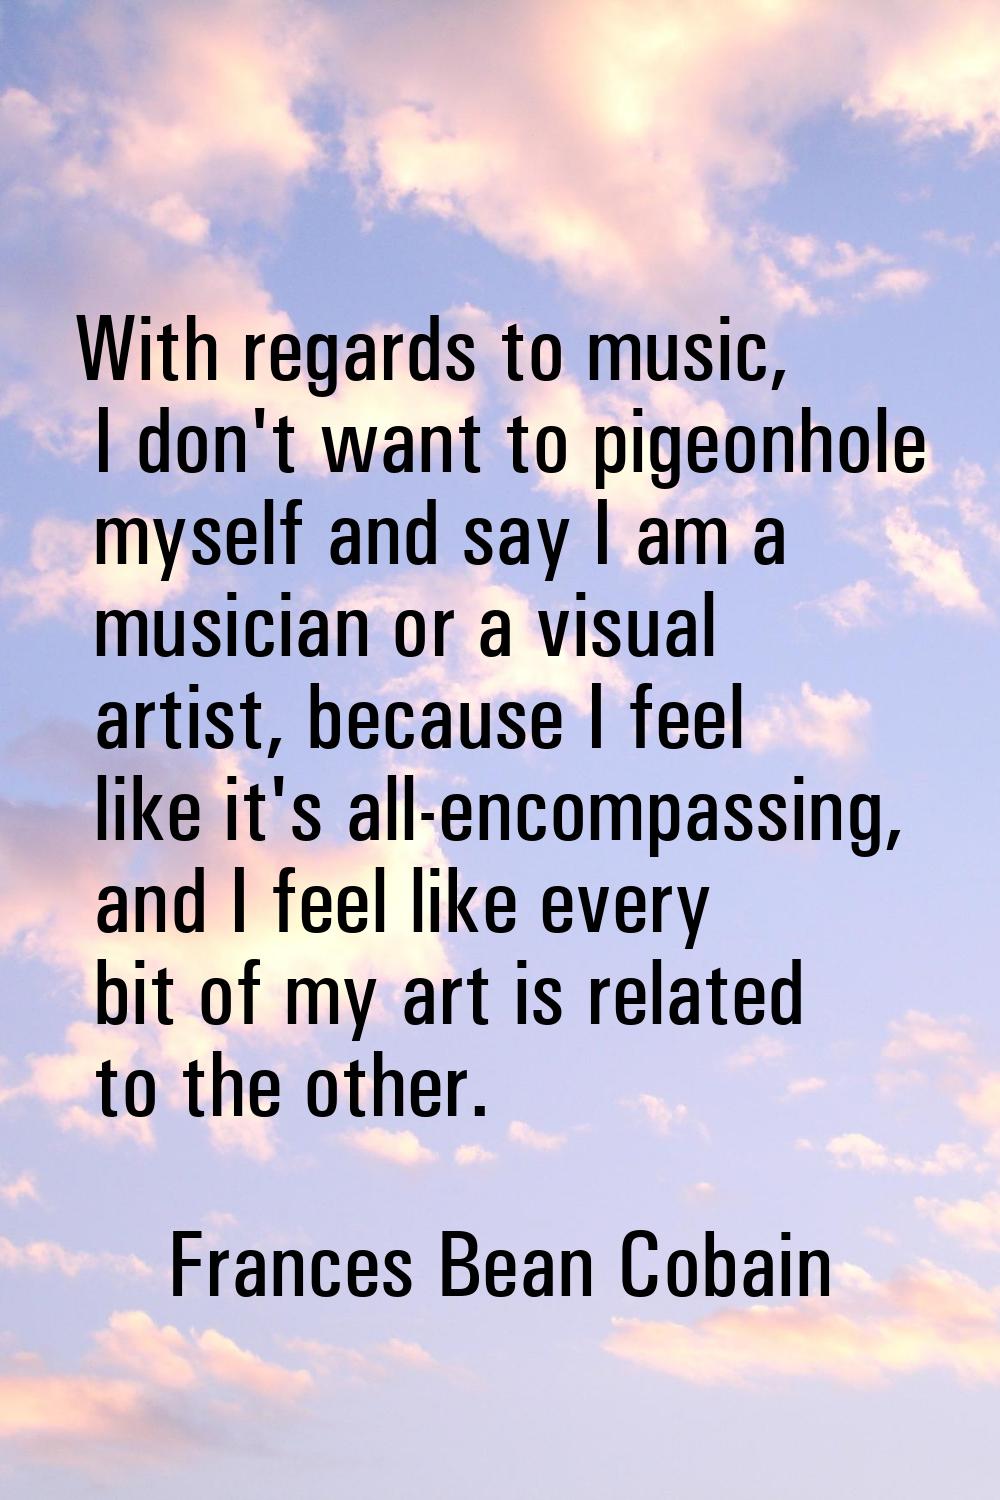 With regards to music, I don't want to pigeonhole myself and say I am a musician or a visual artist